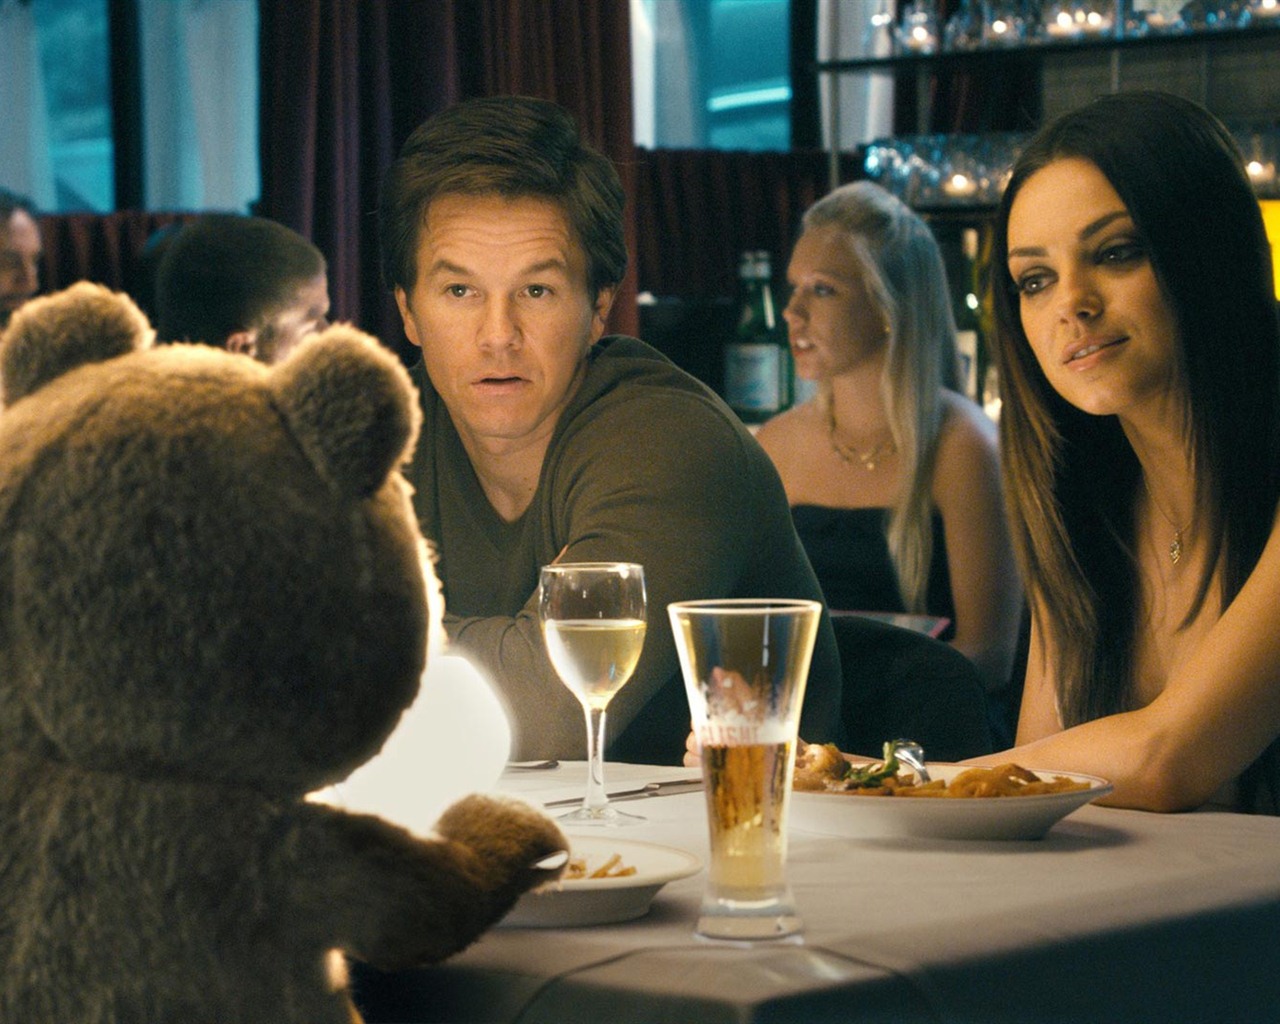 Ted 2012 HD movie wallpapers #9 - 1280x1024